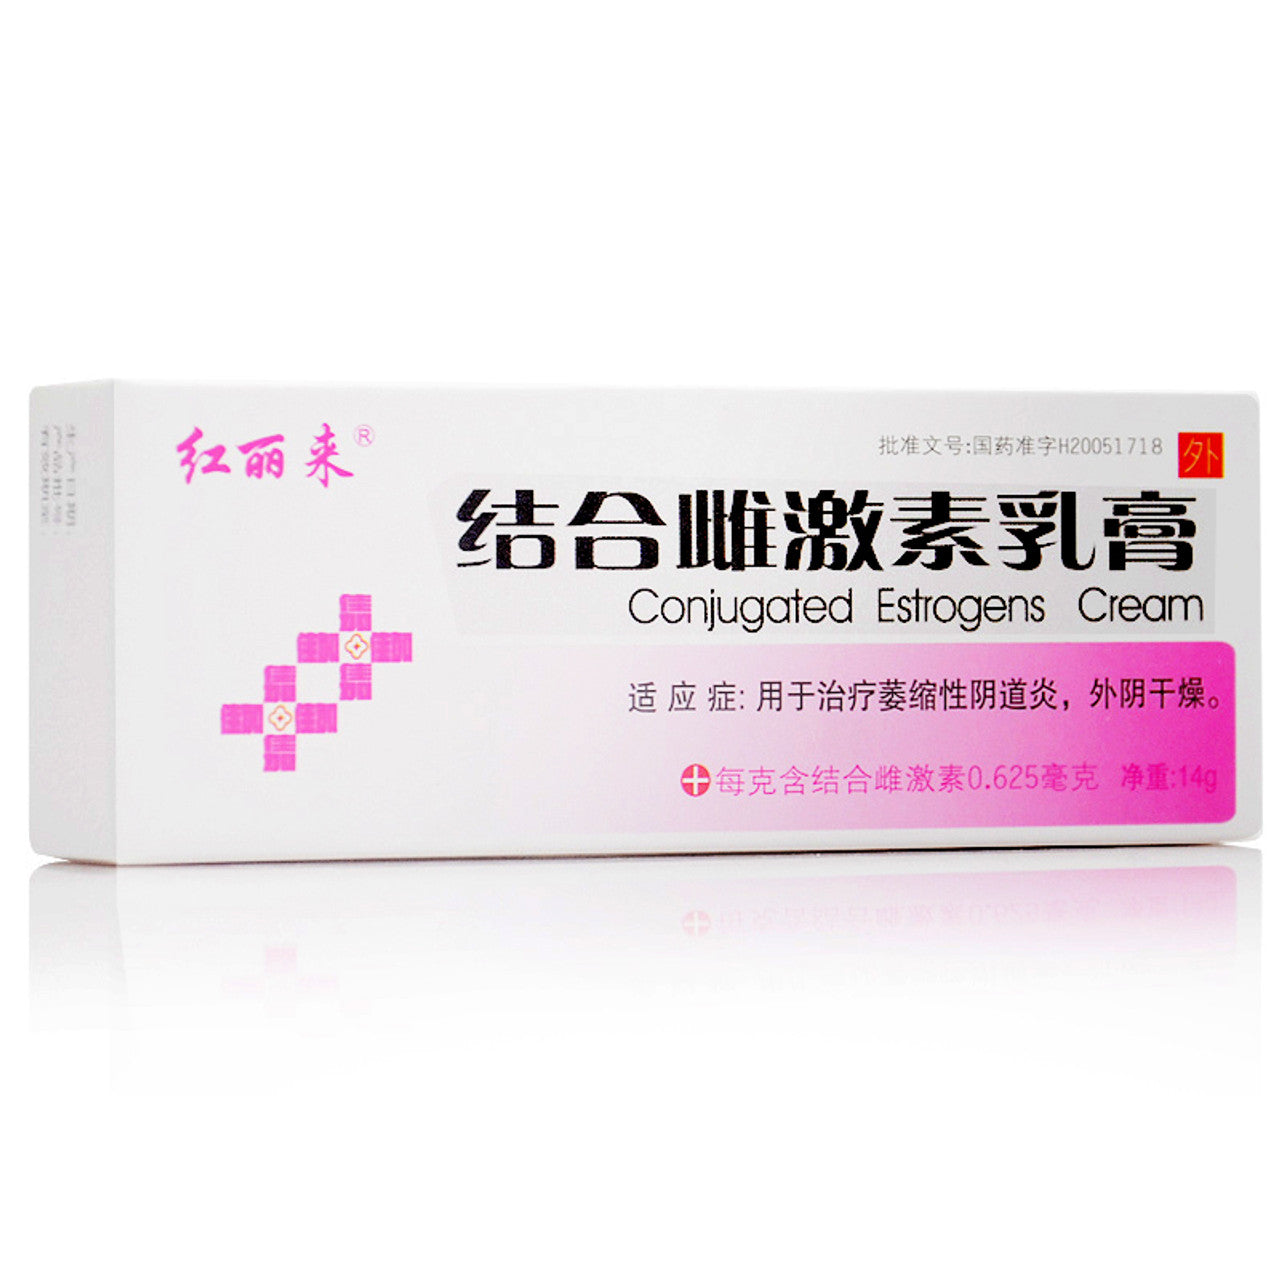 Honglilai Conjugated Estrogens Cream For Vaginitis 14g Ointment*5 boxes